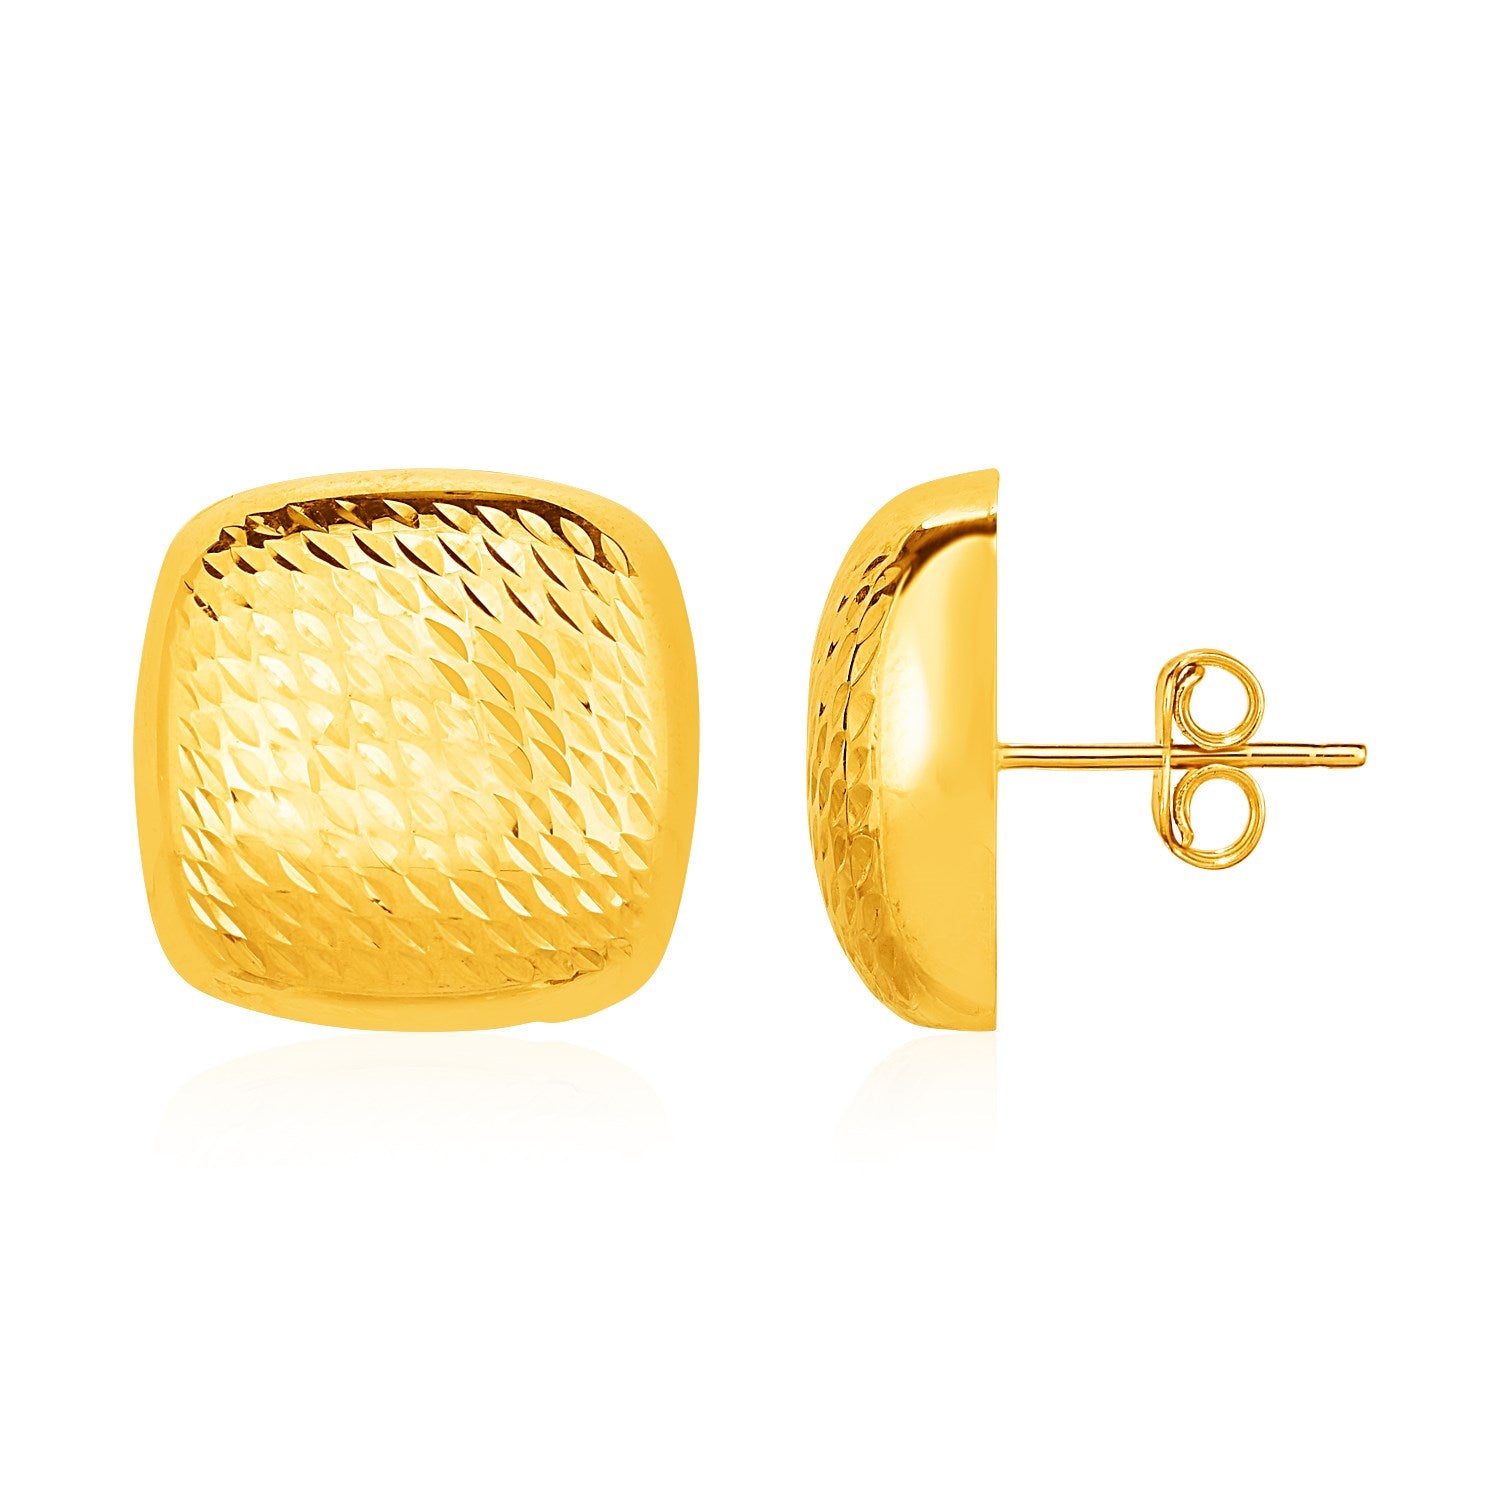 Textured Rounded Square Post Earrings in 14k Yellow Gold